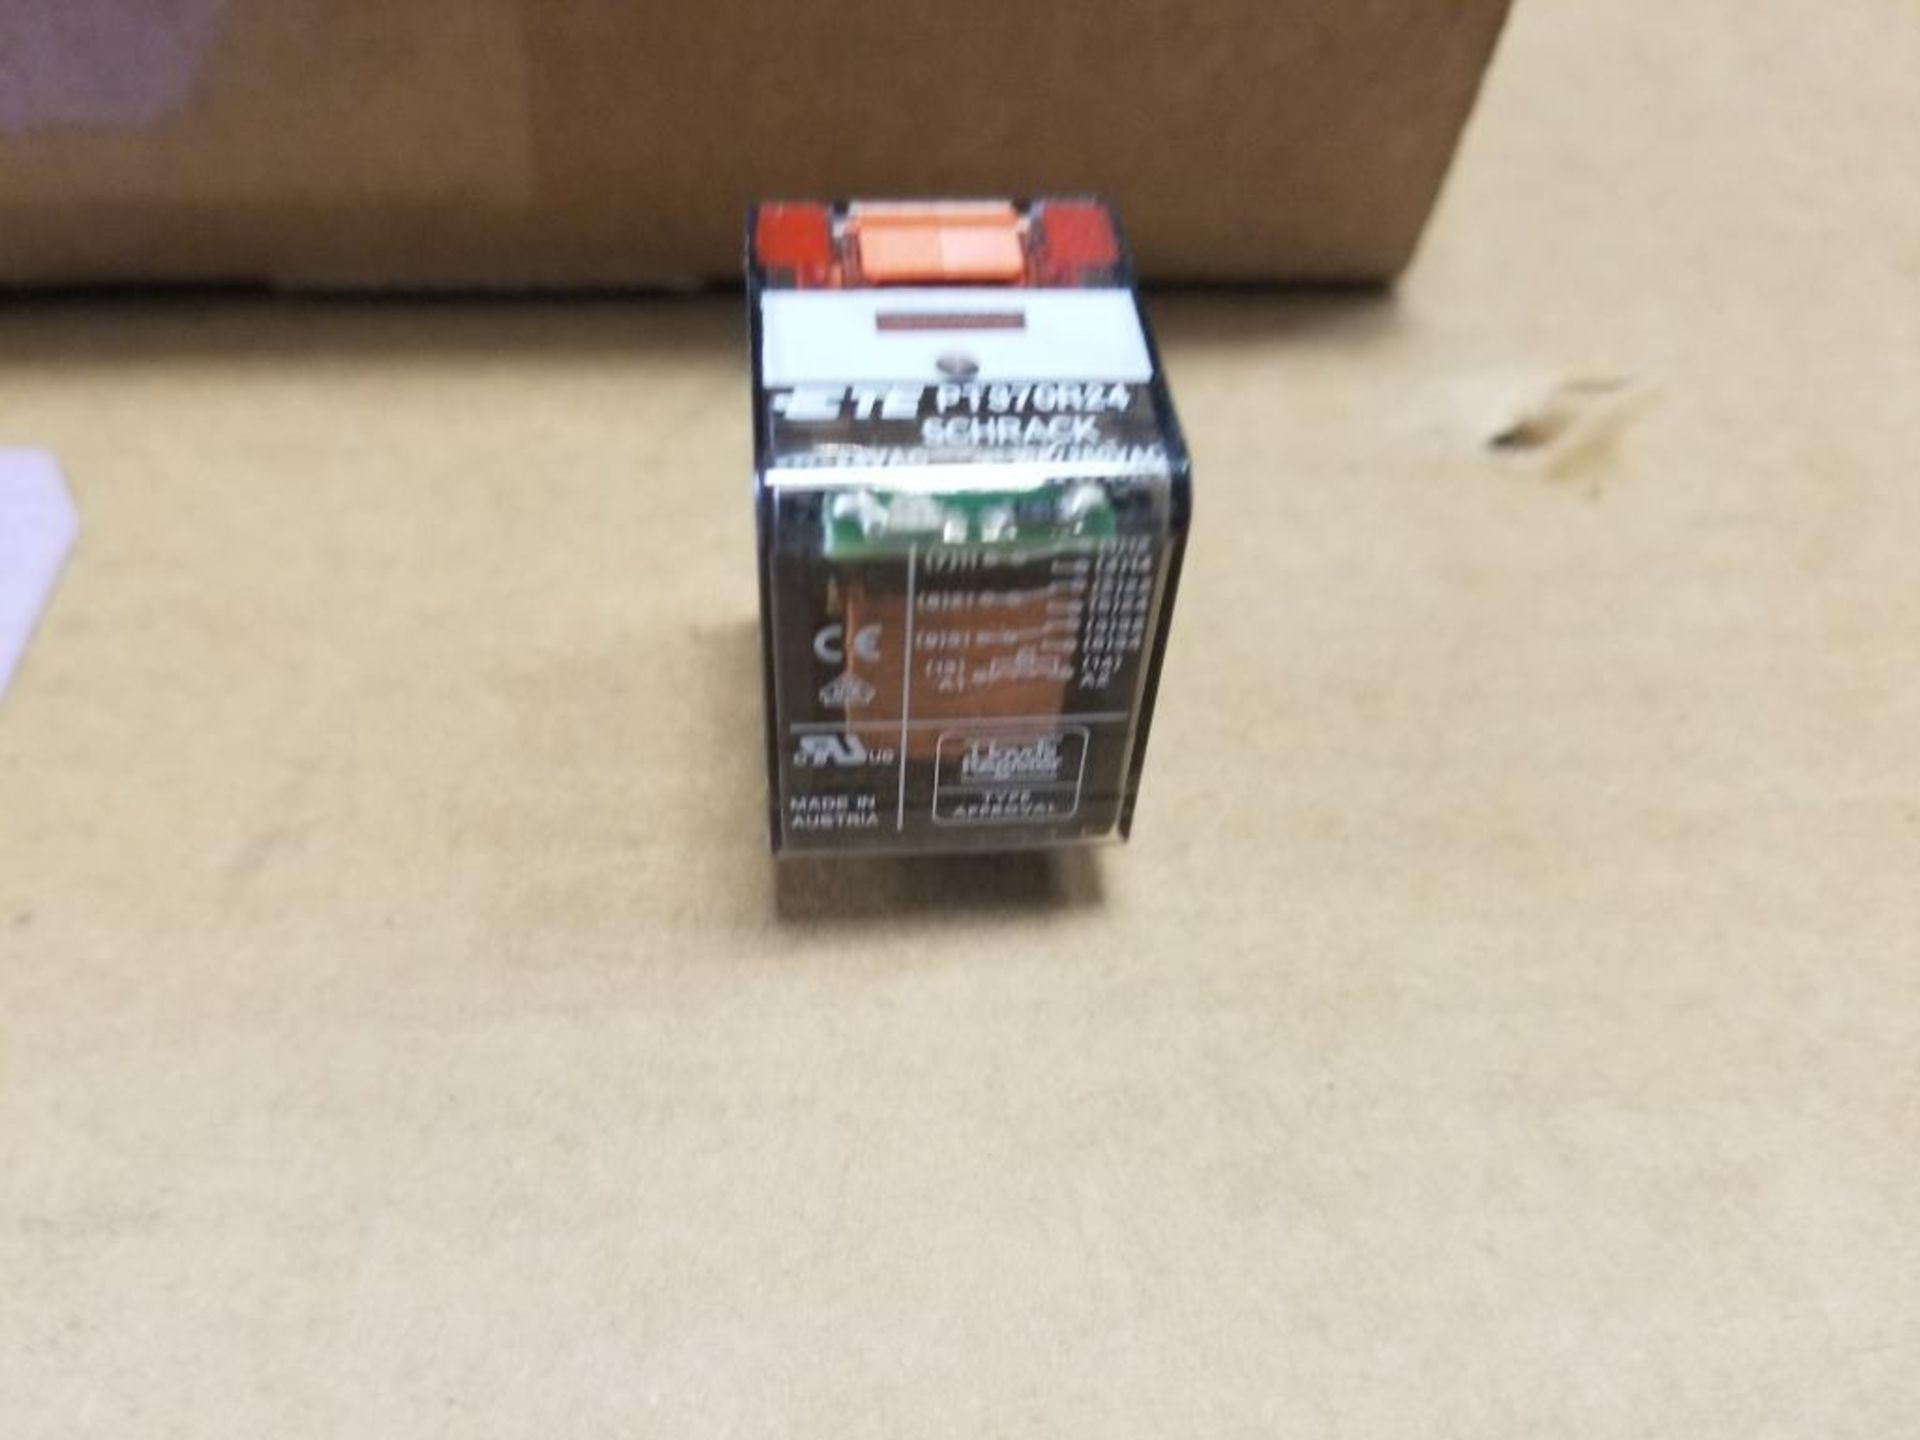 Qty 160 - TE Connectivity Schrack power relay. Part number PT370R24. New in bulk pack. - Image 3 of 5